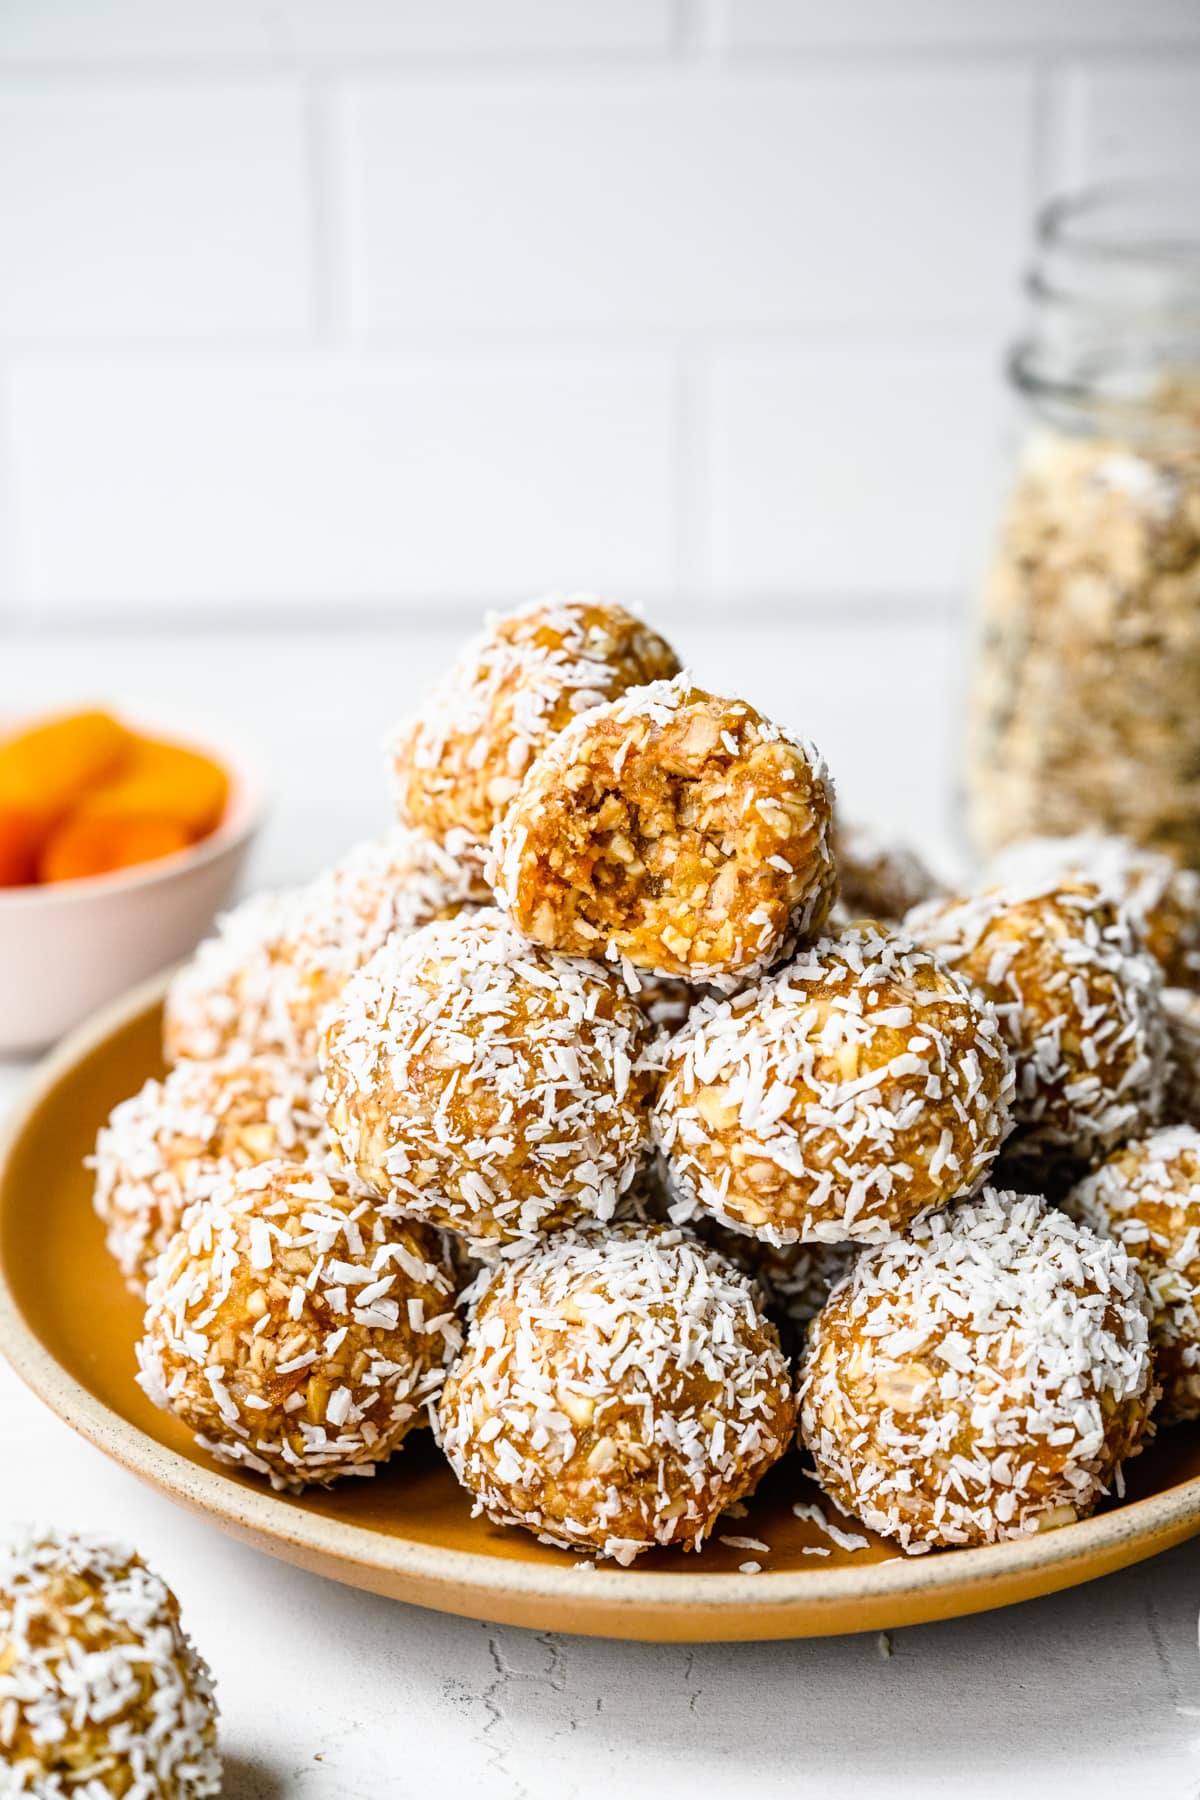 Finished apricot bliss balls on an orange plate.